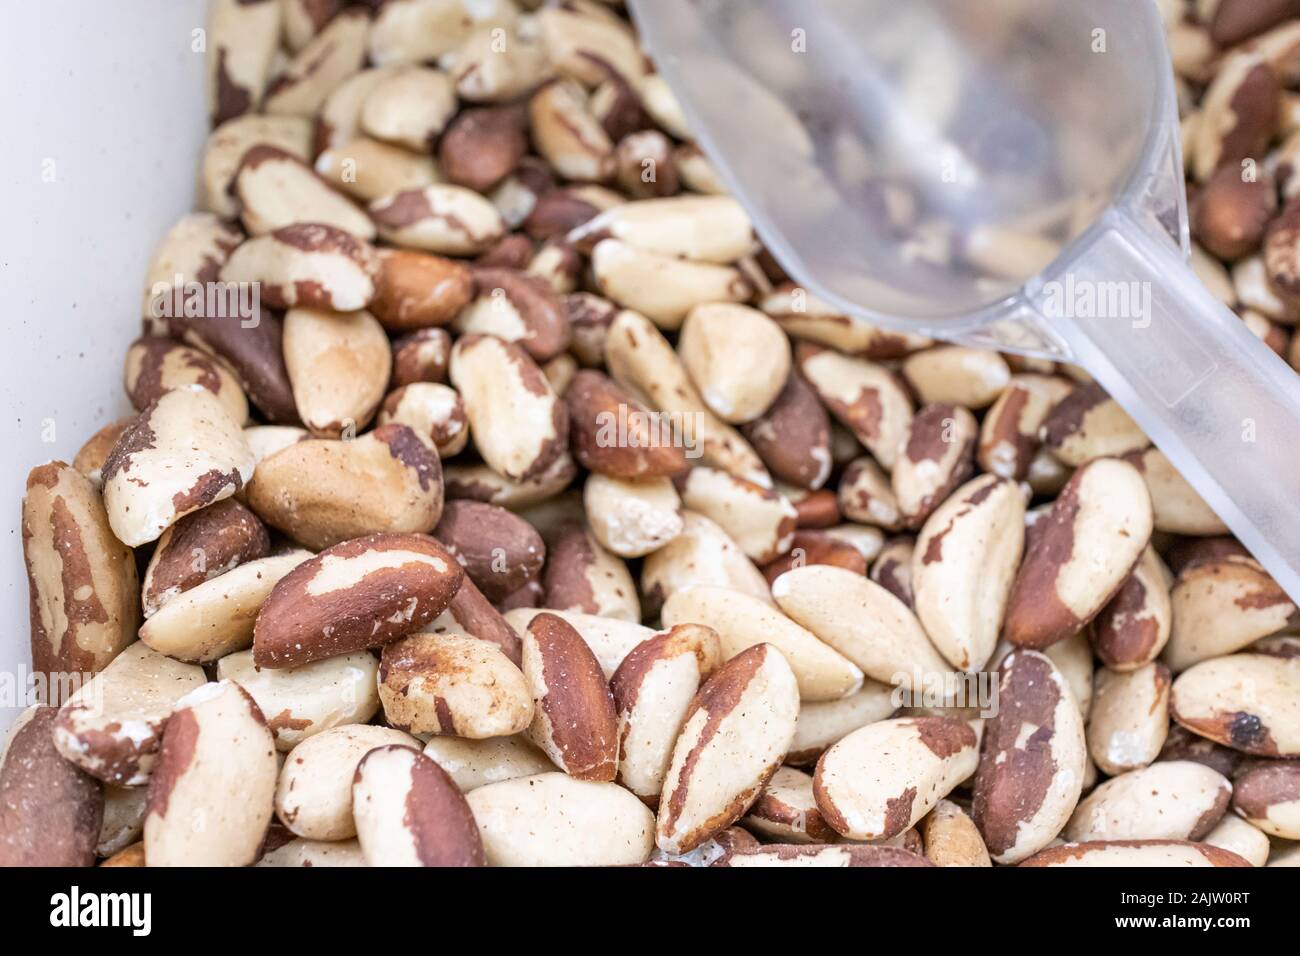 Brazil nuts on display in dispenser with a scoop Stock Photo